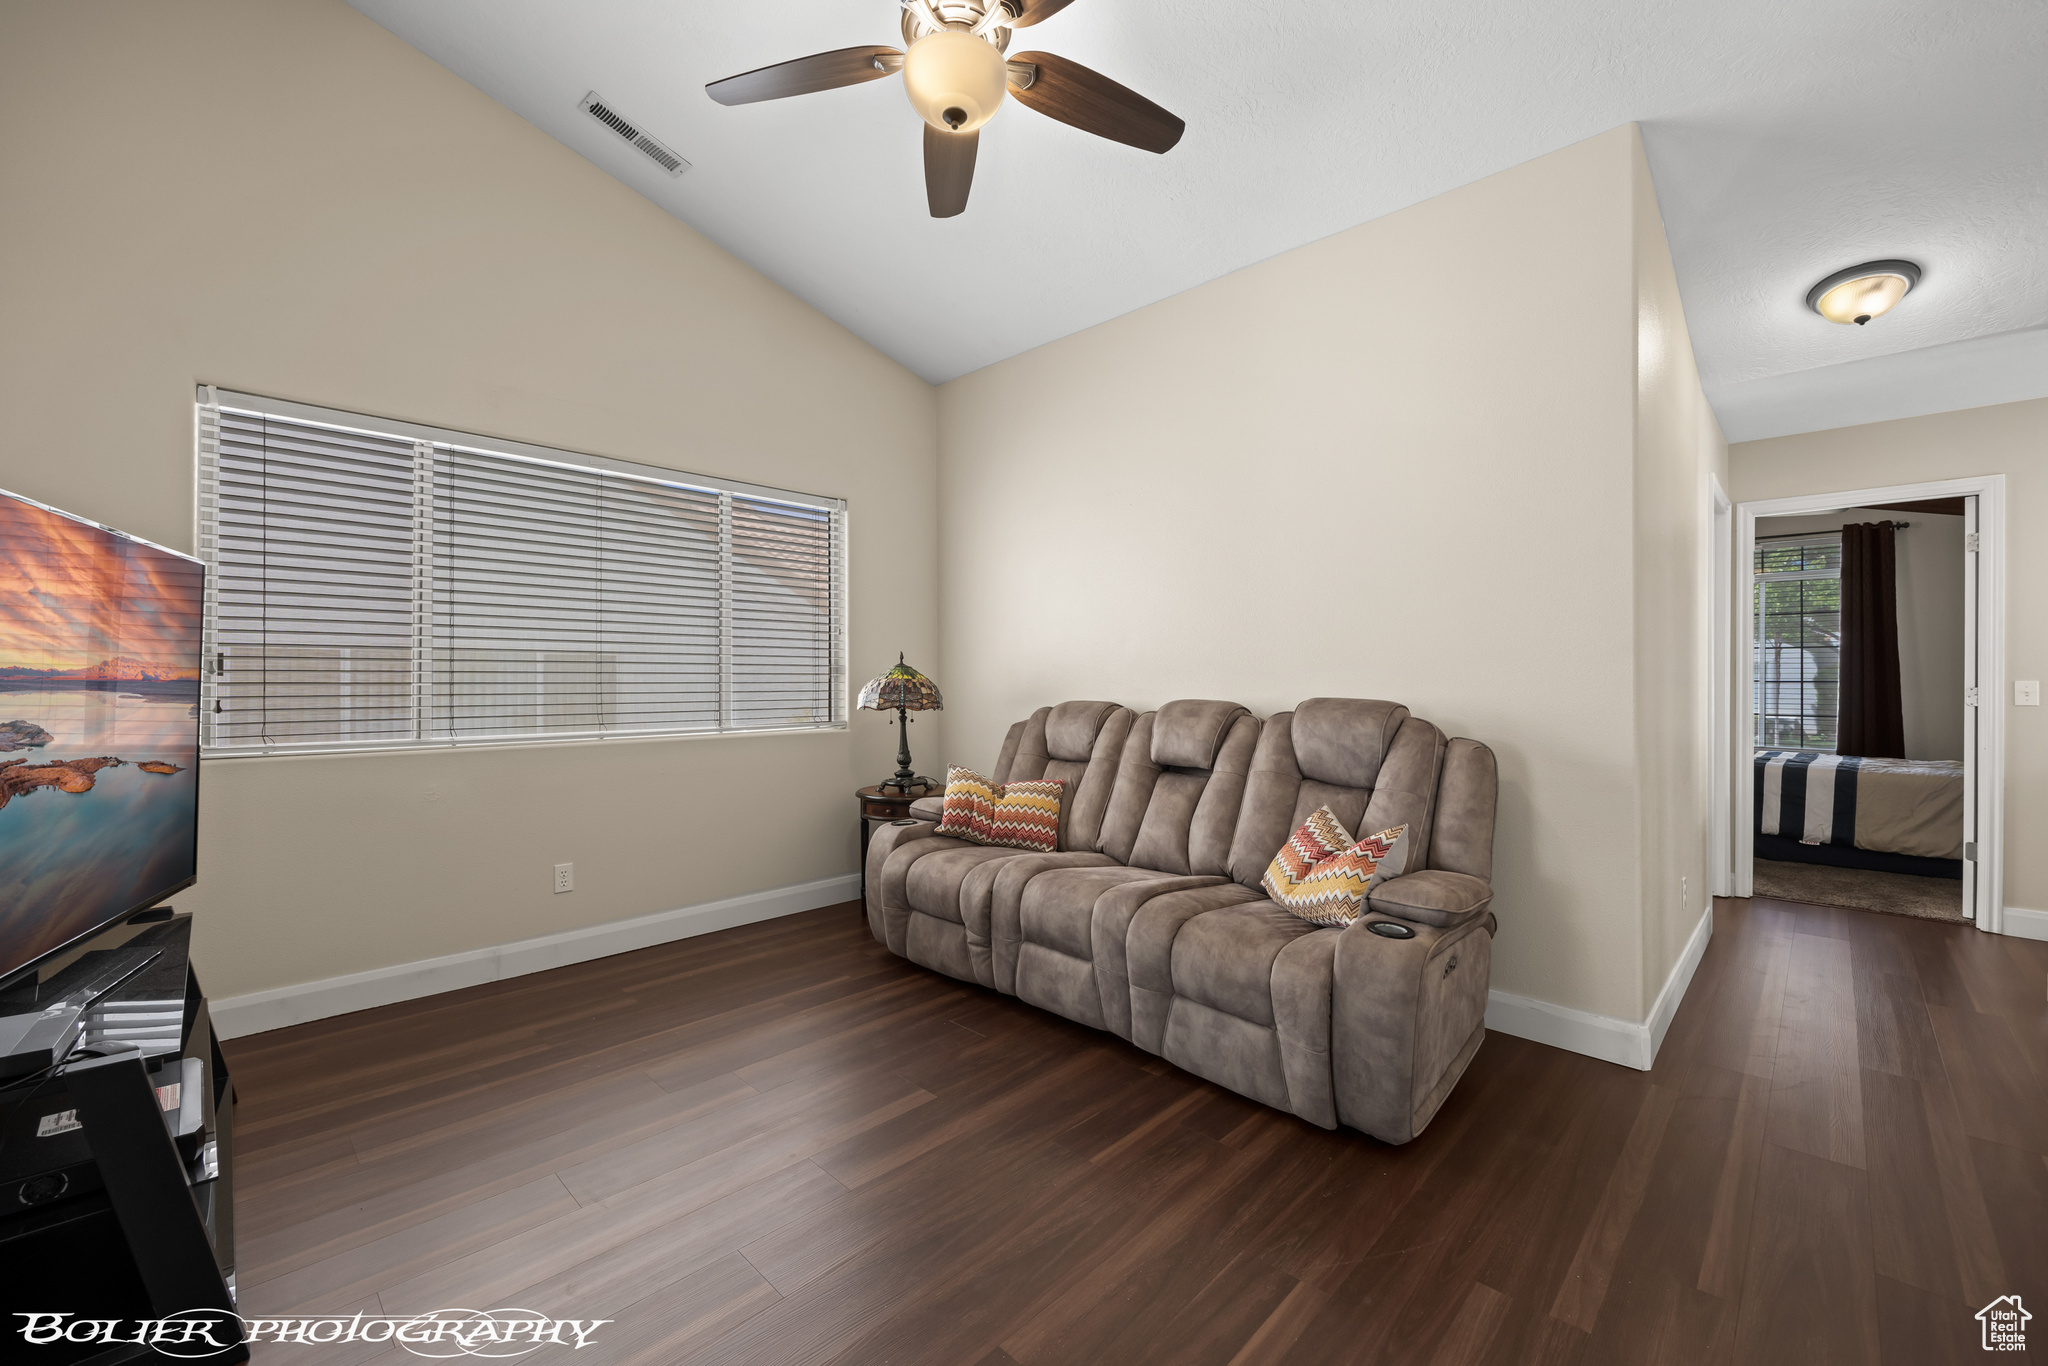 Second Living Area featuring ceiling fan, lofted ceiling, and dark wood-type flooring